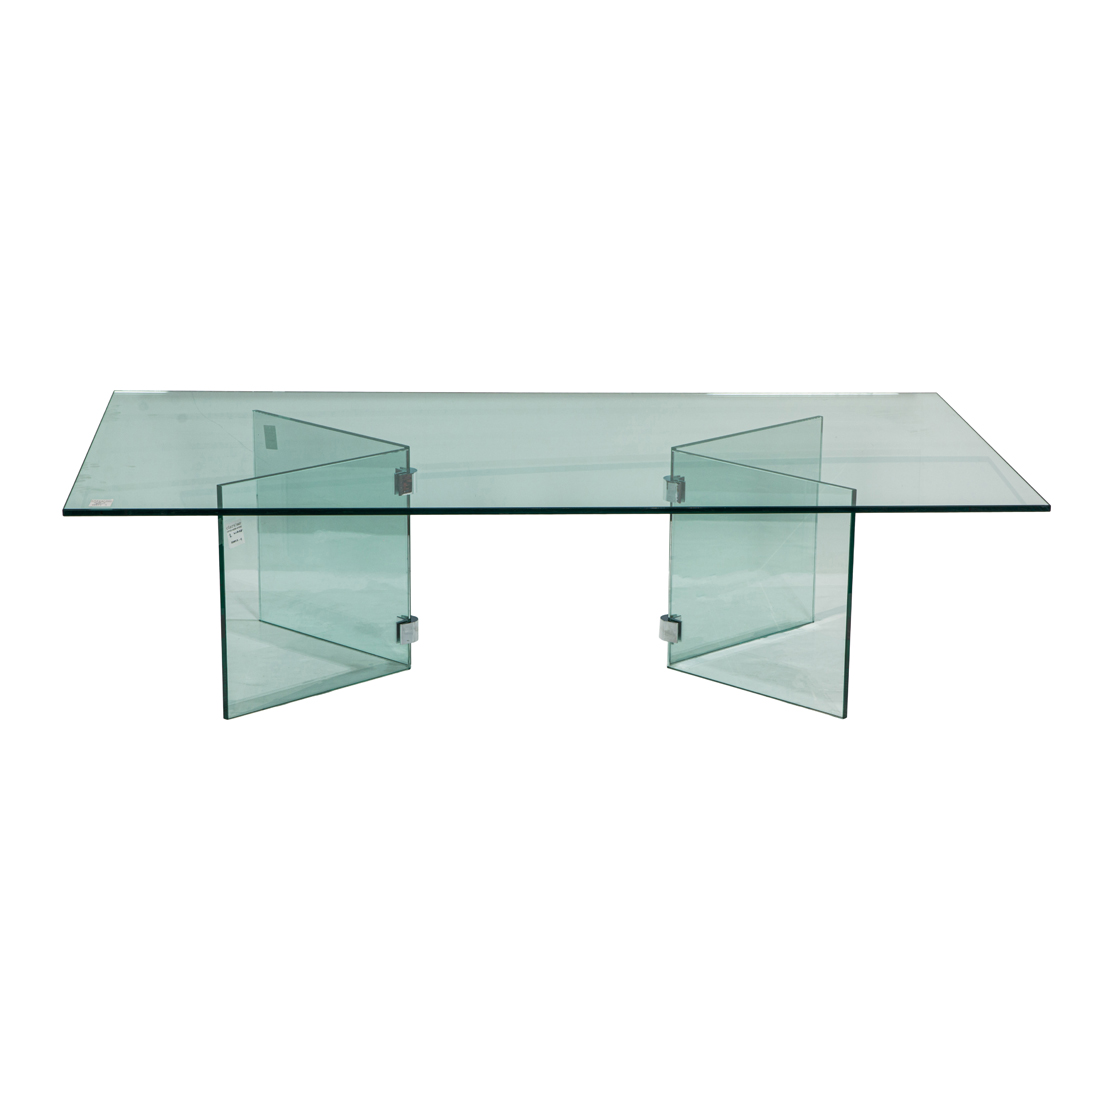 A PACE STYLE GLASS TOP COFFEE TABLE 3a0fe7